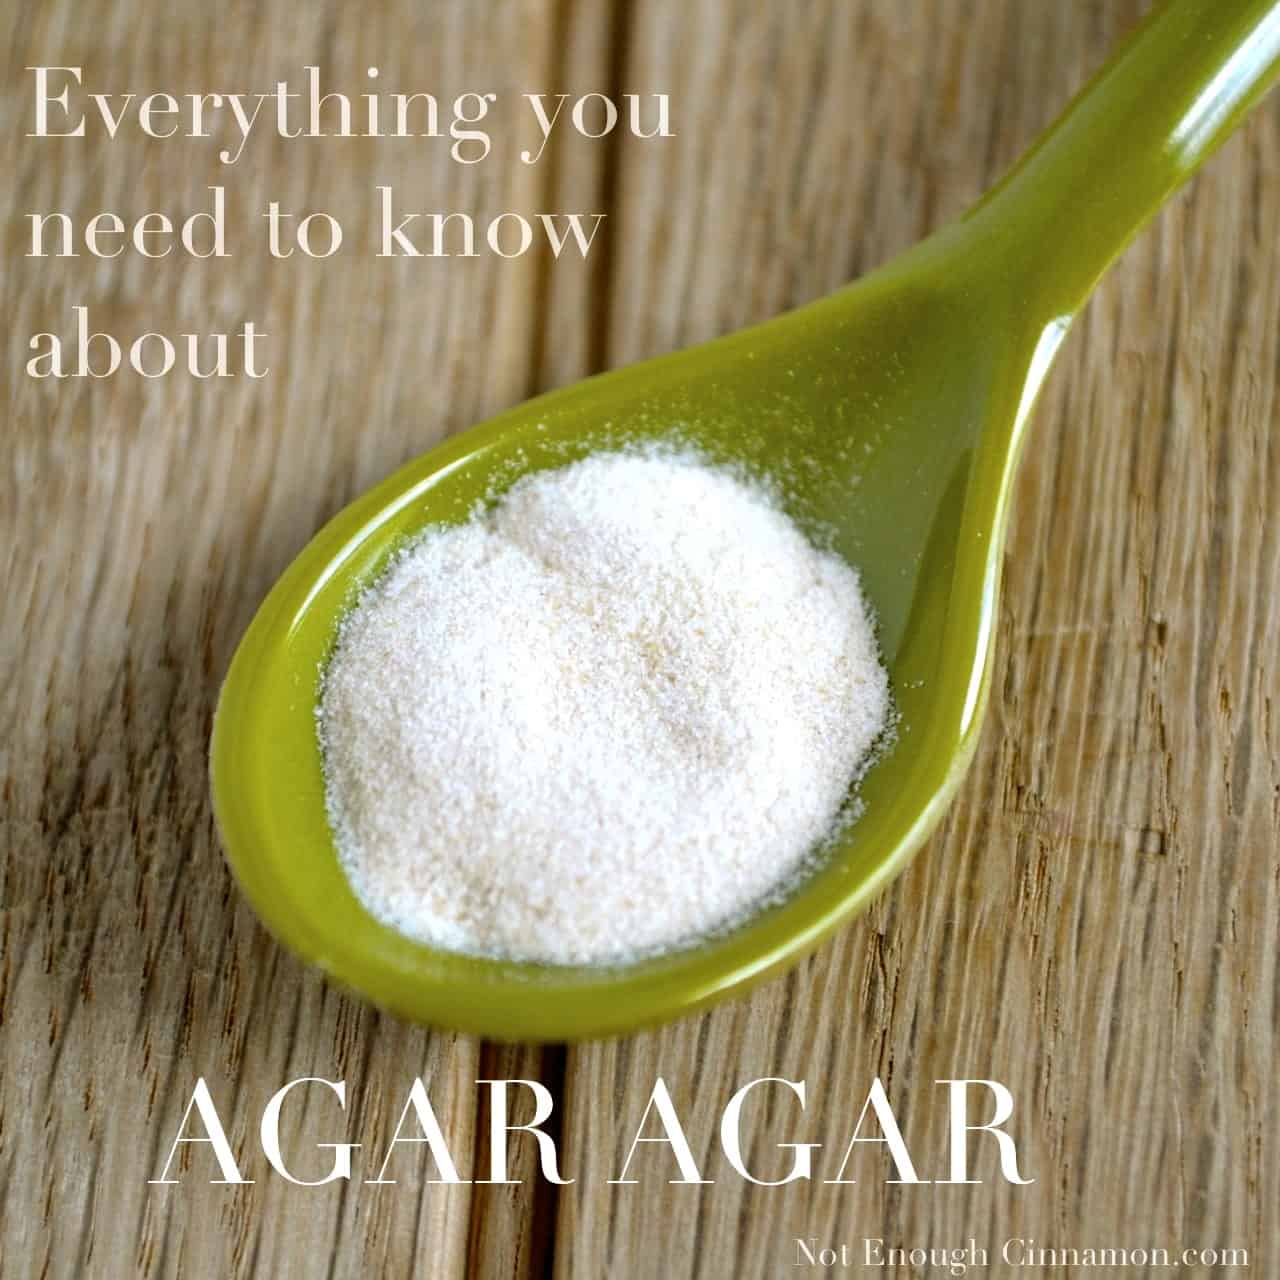 Everything you need to know about agar - Not Enough Cinnamon